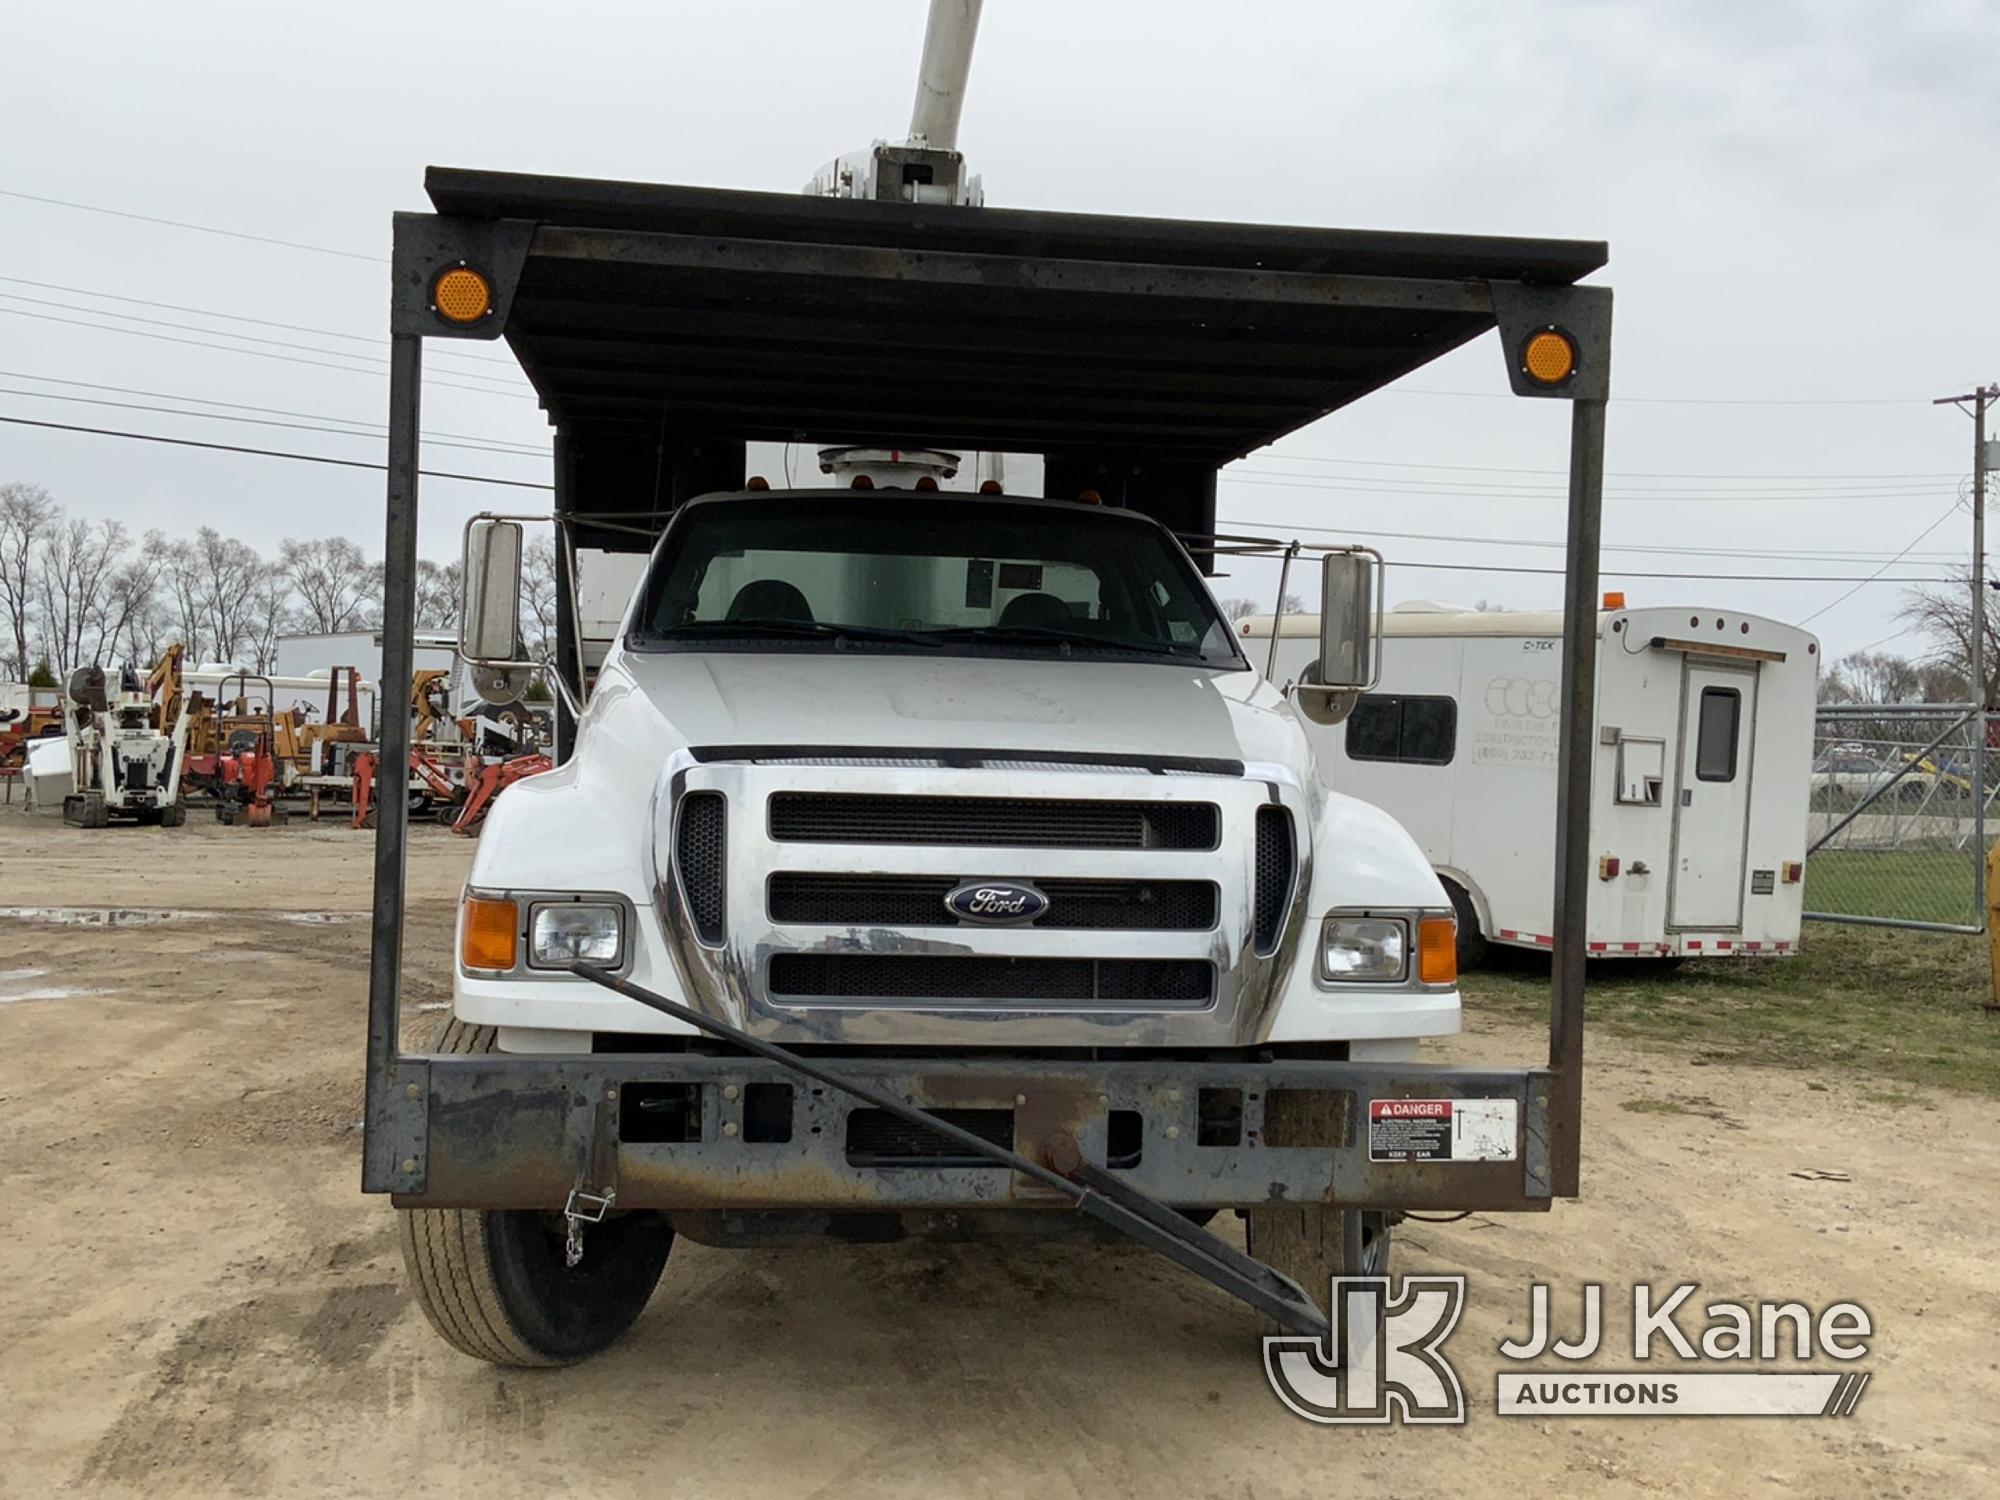 (South Beloit, IL) Altec LR756, Over-Center Bucket Truck mounted behind cab on 2013 Ford F750 Chippe